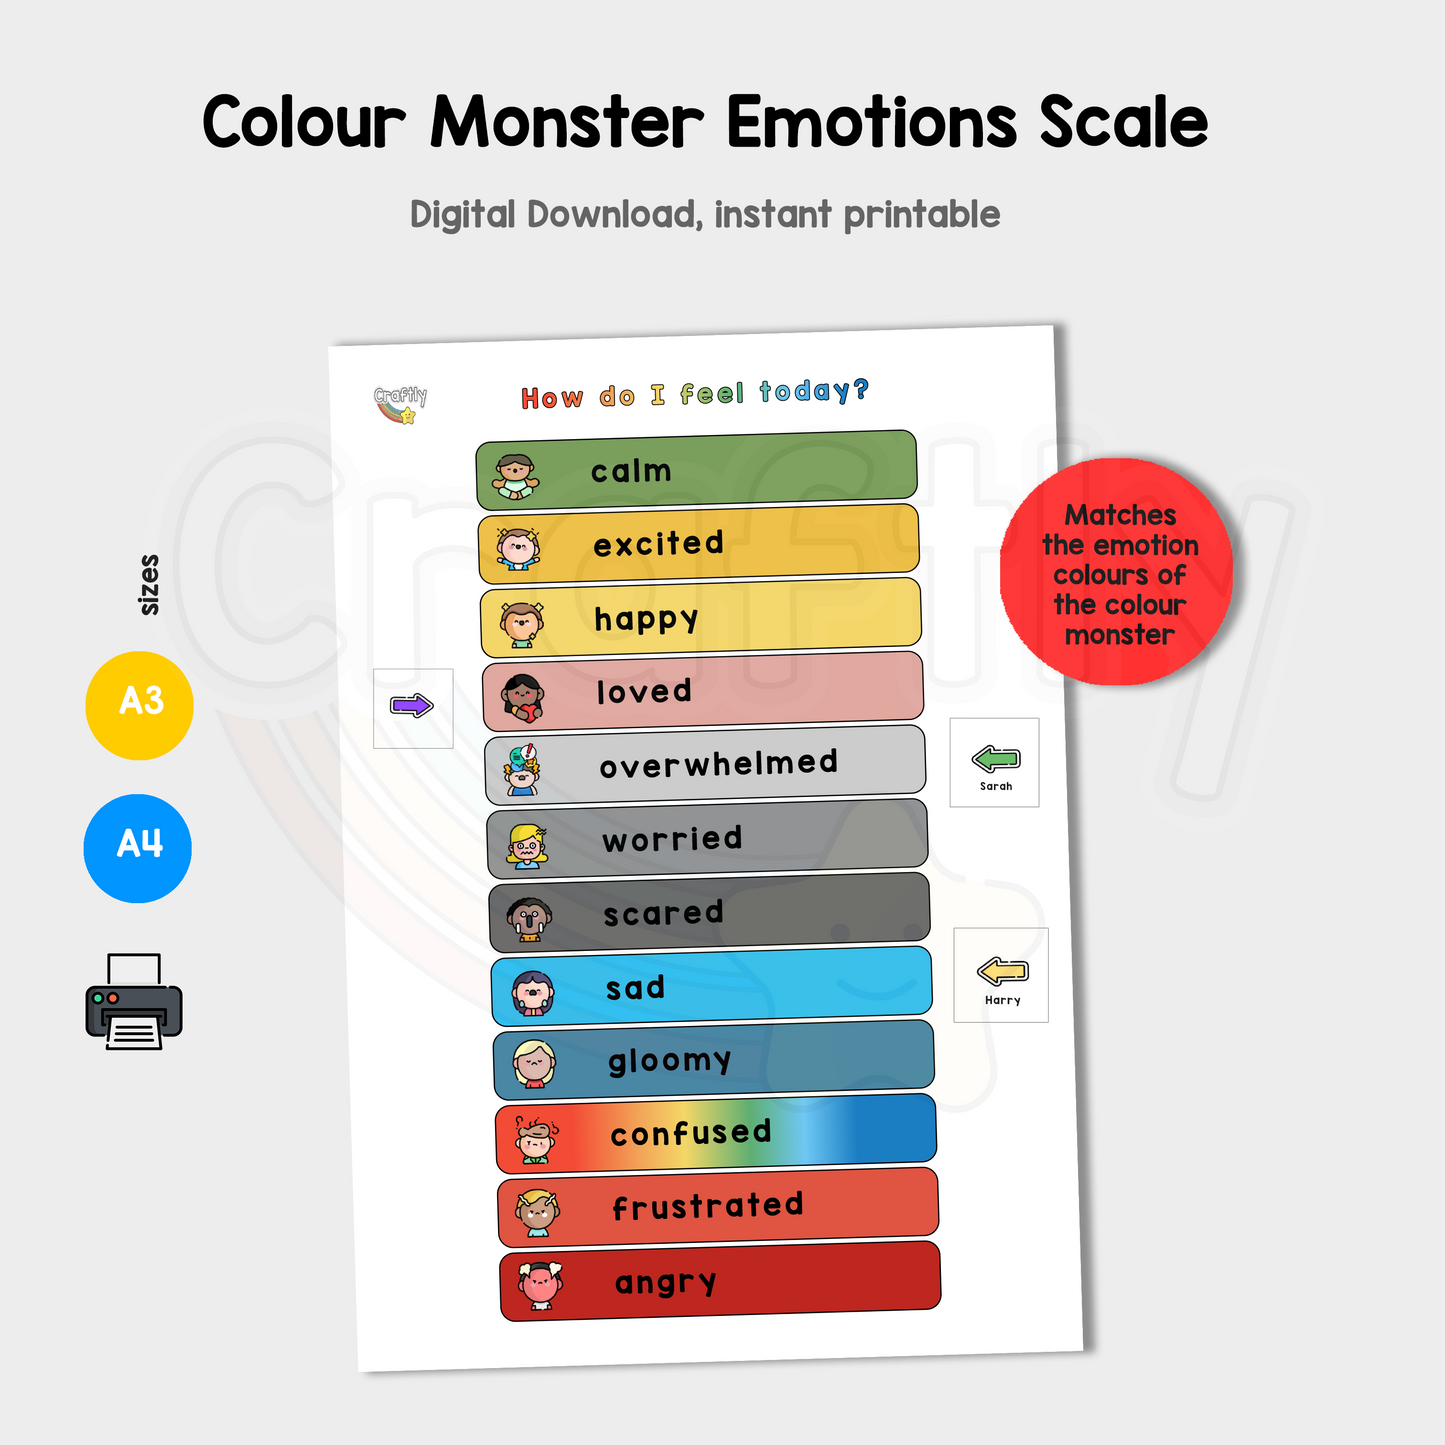 Colour Monster Emotions Scale